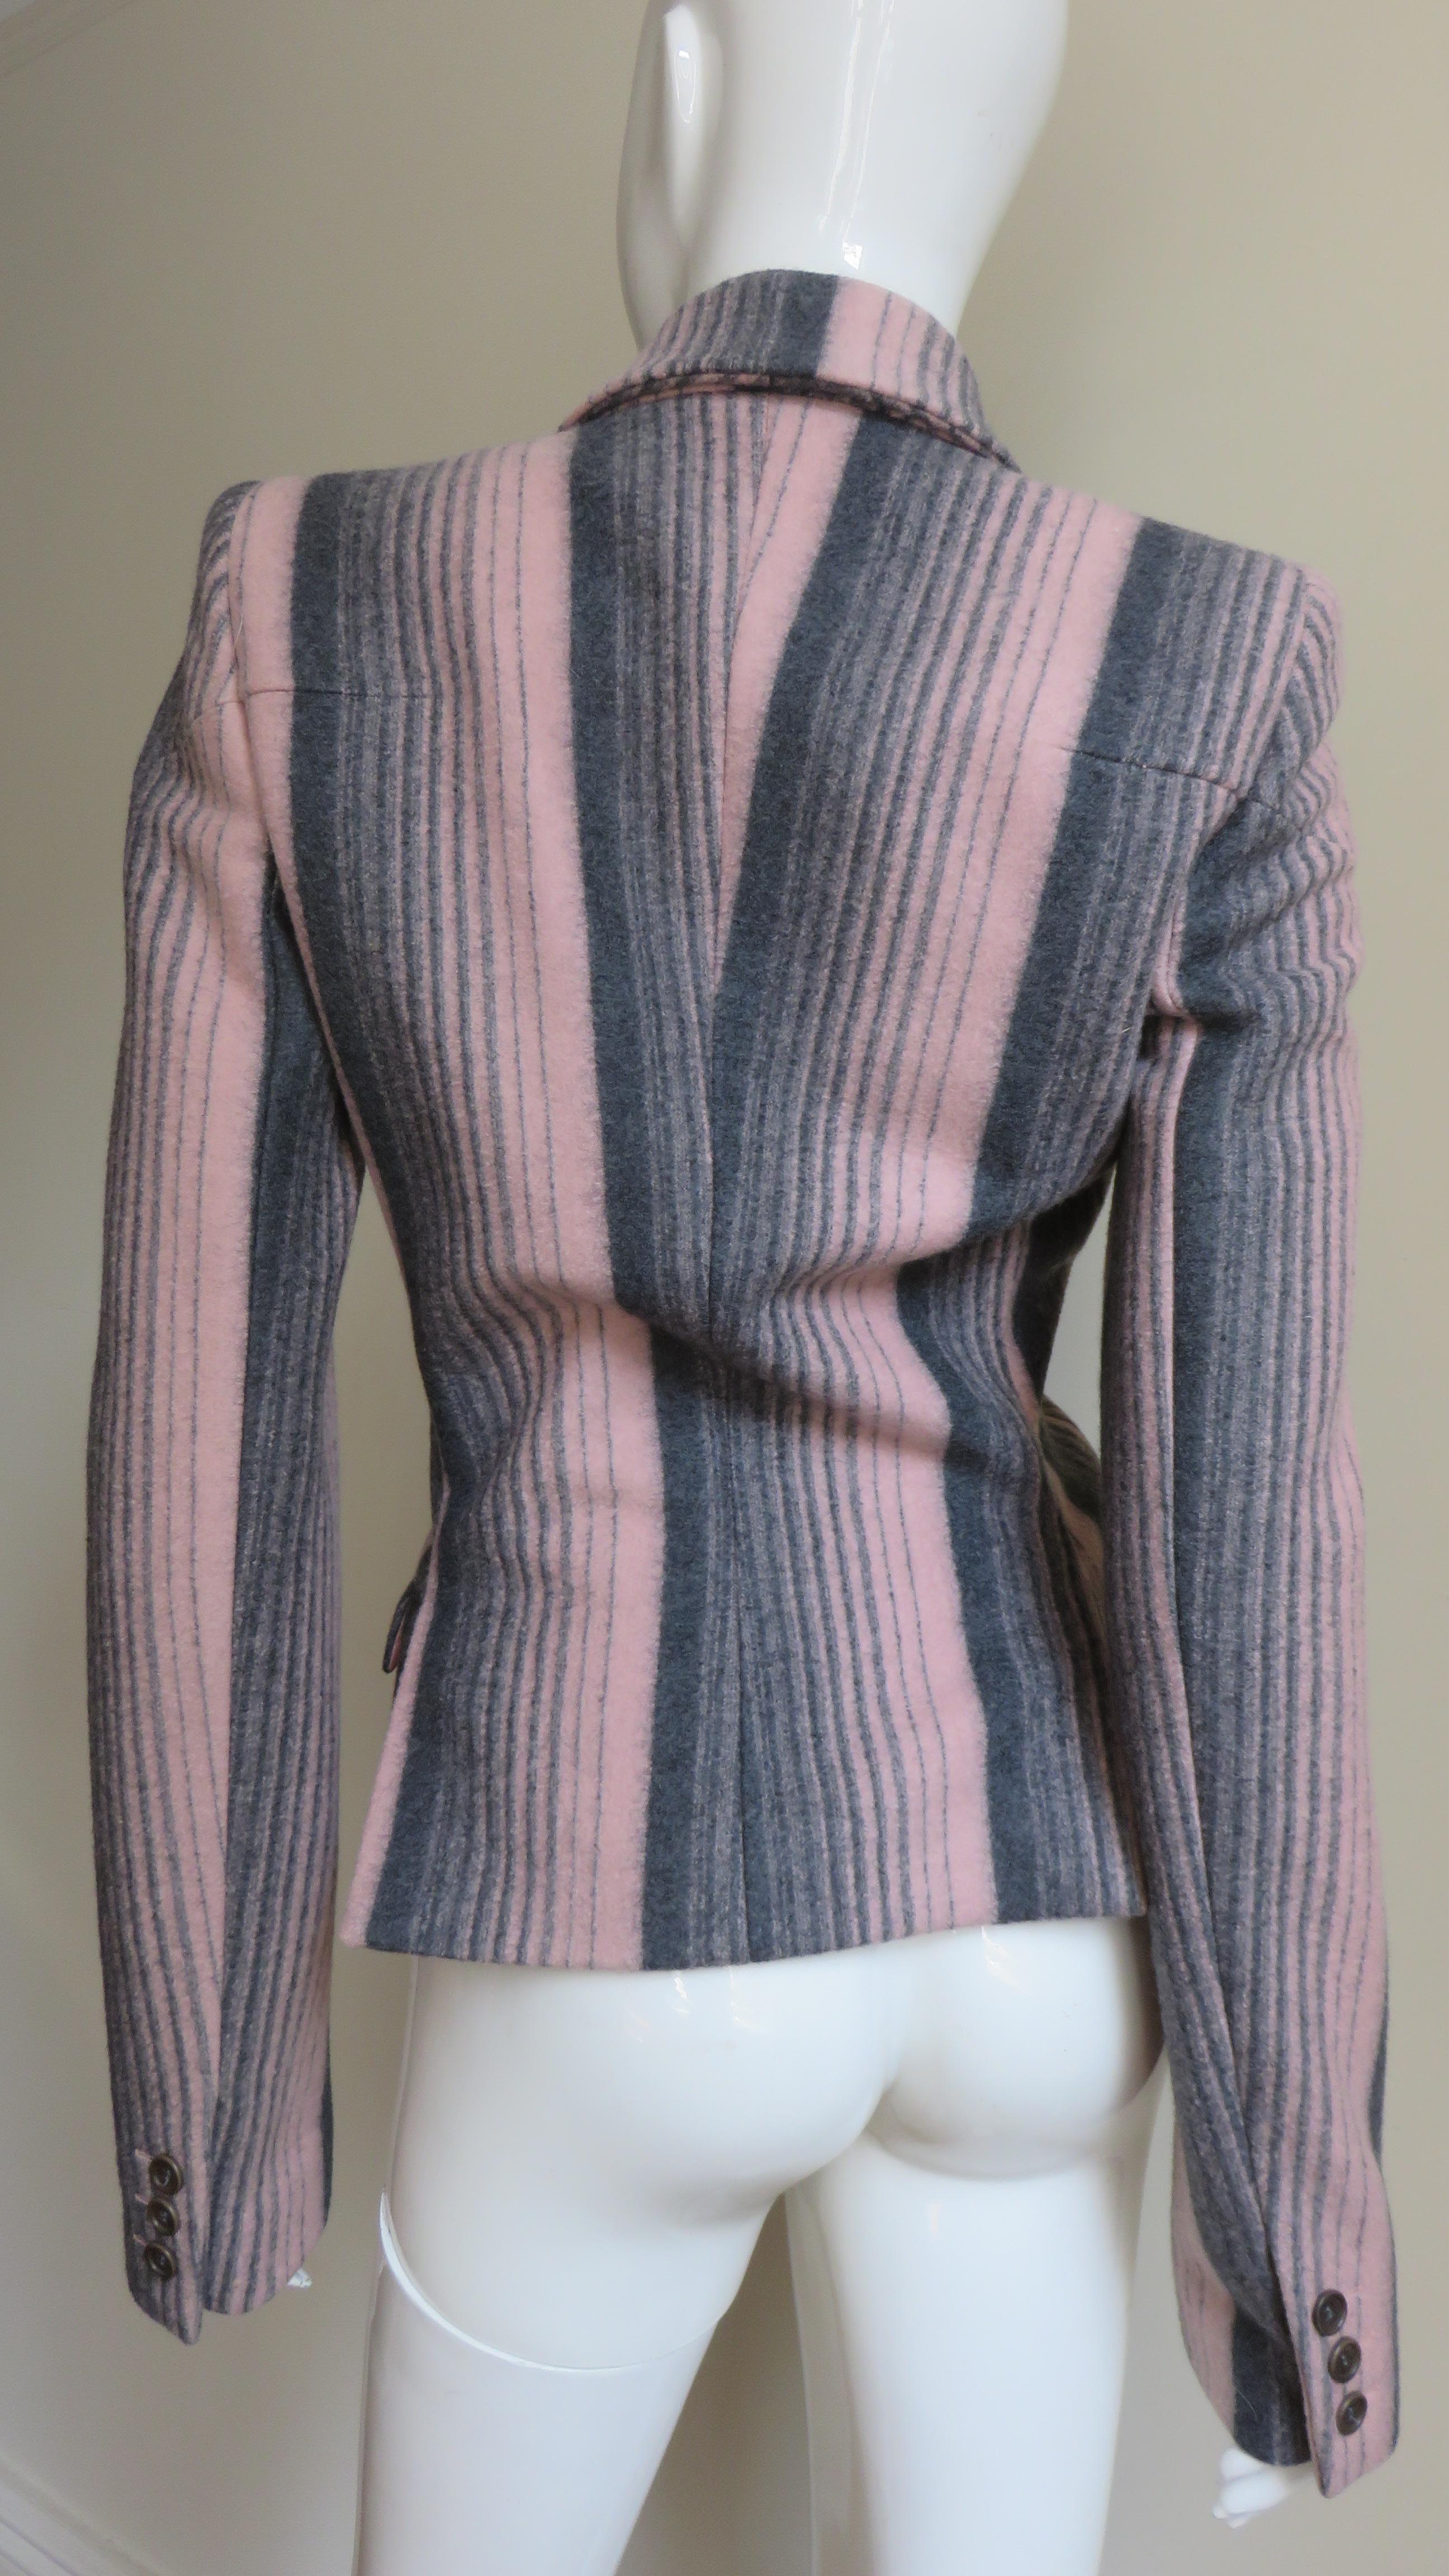 Alexander McQueen New Grey and Pink Striped Jacket F/W 1999 For Sale 4